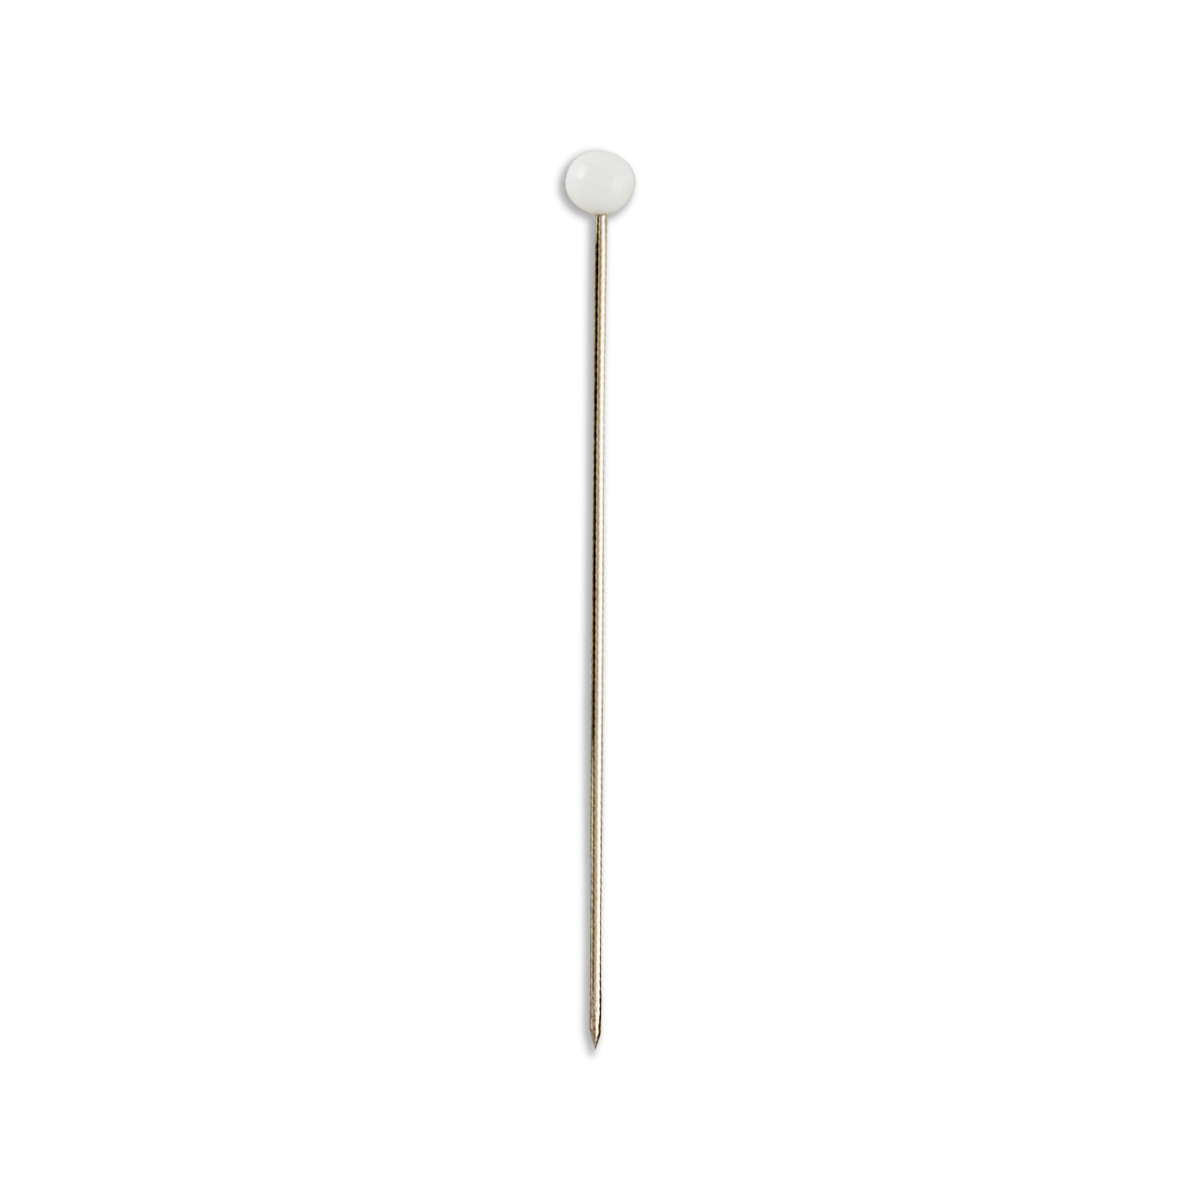 Extra Long Glass Headed Pins - Sewing Pins - other pin sizes available